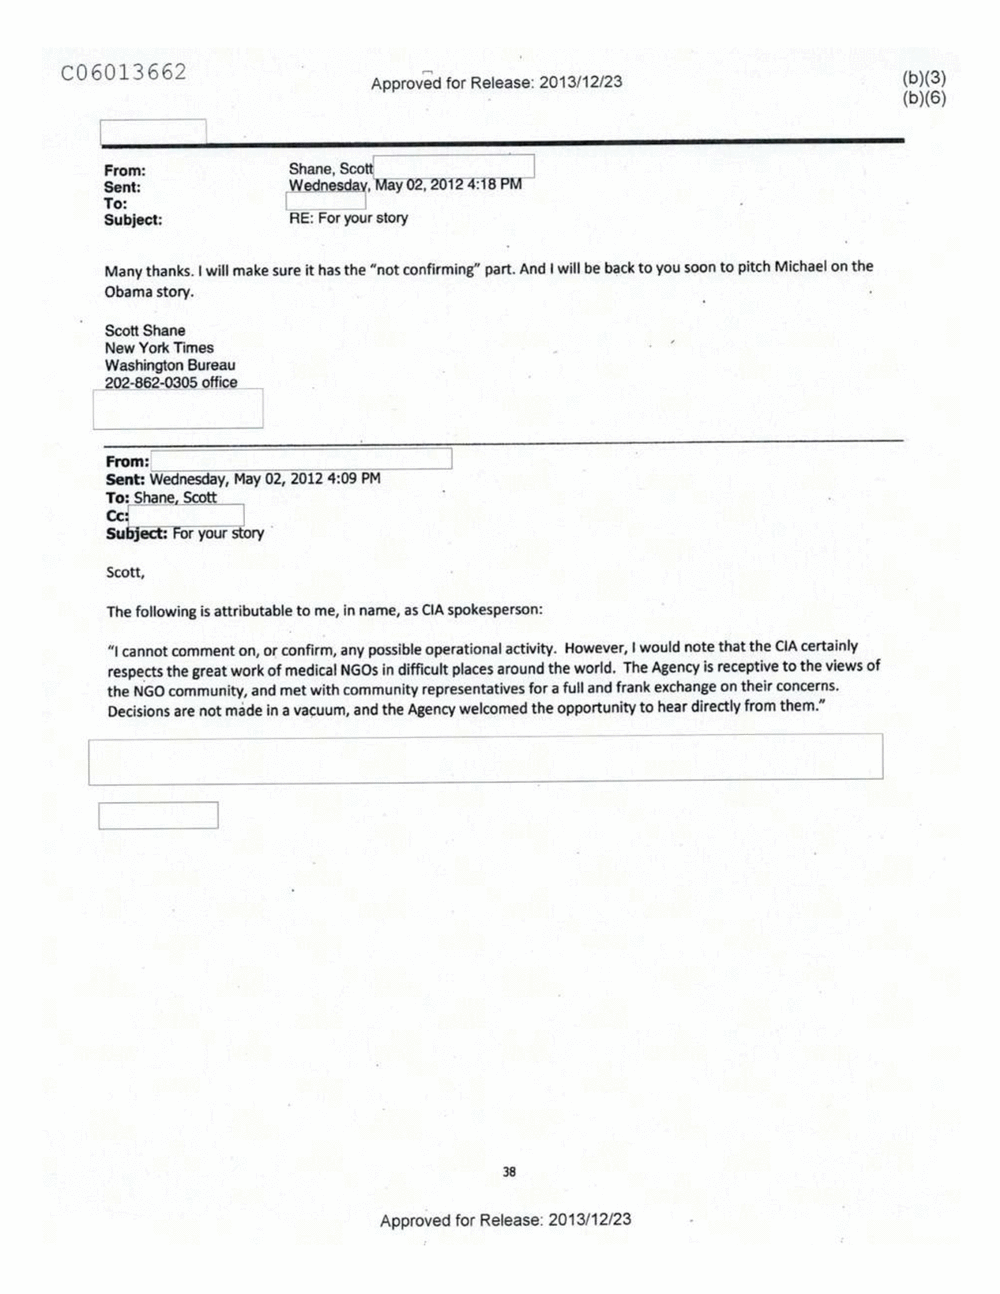 Page 507 from Email Correspondence Between Reporters and CIA Flacks